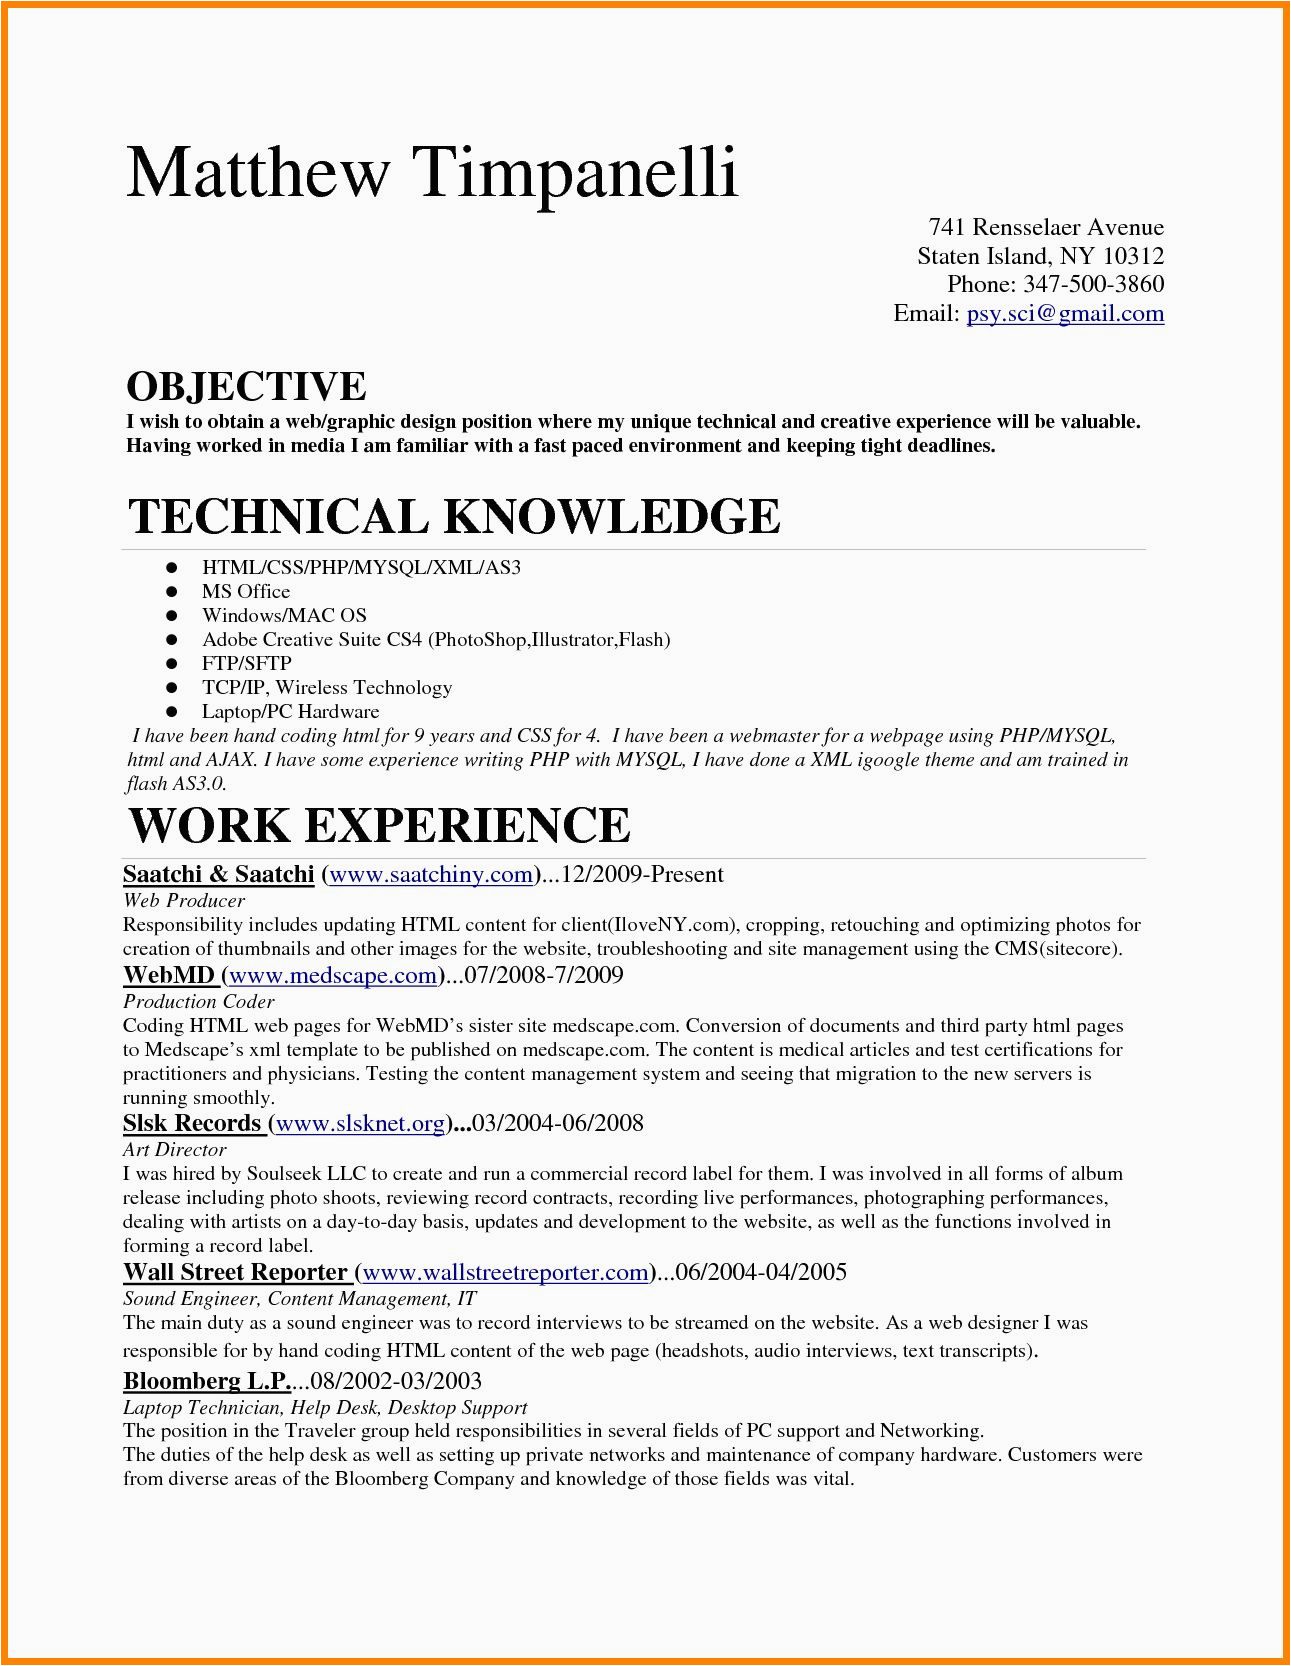 Sample Resume for Coding and Billing 23 Medical Coder Resume Examples In 2020 with Images